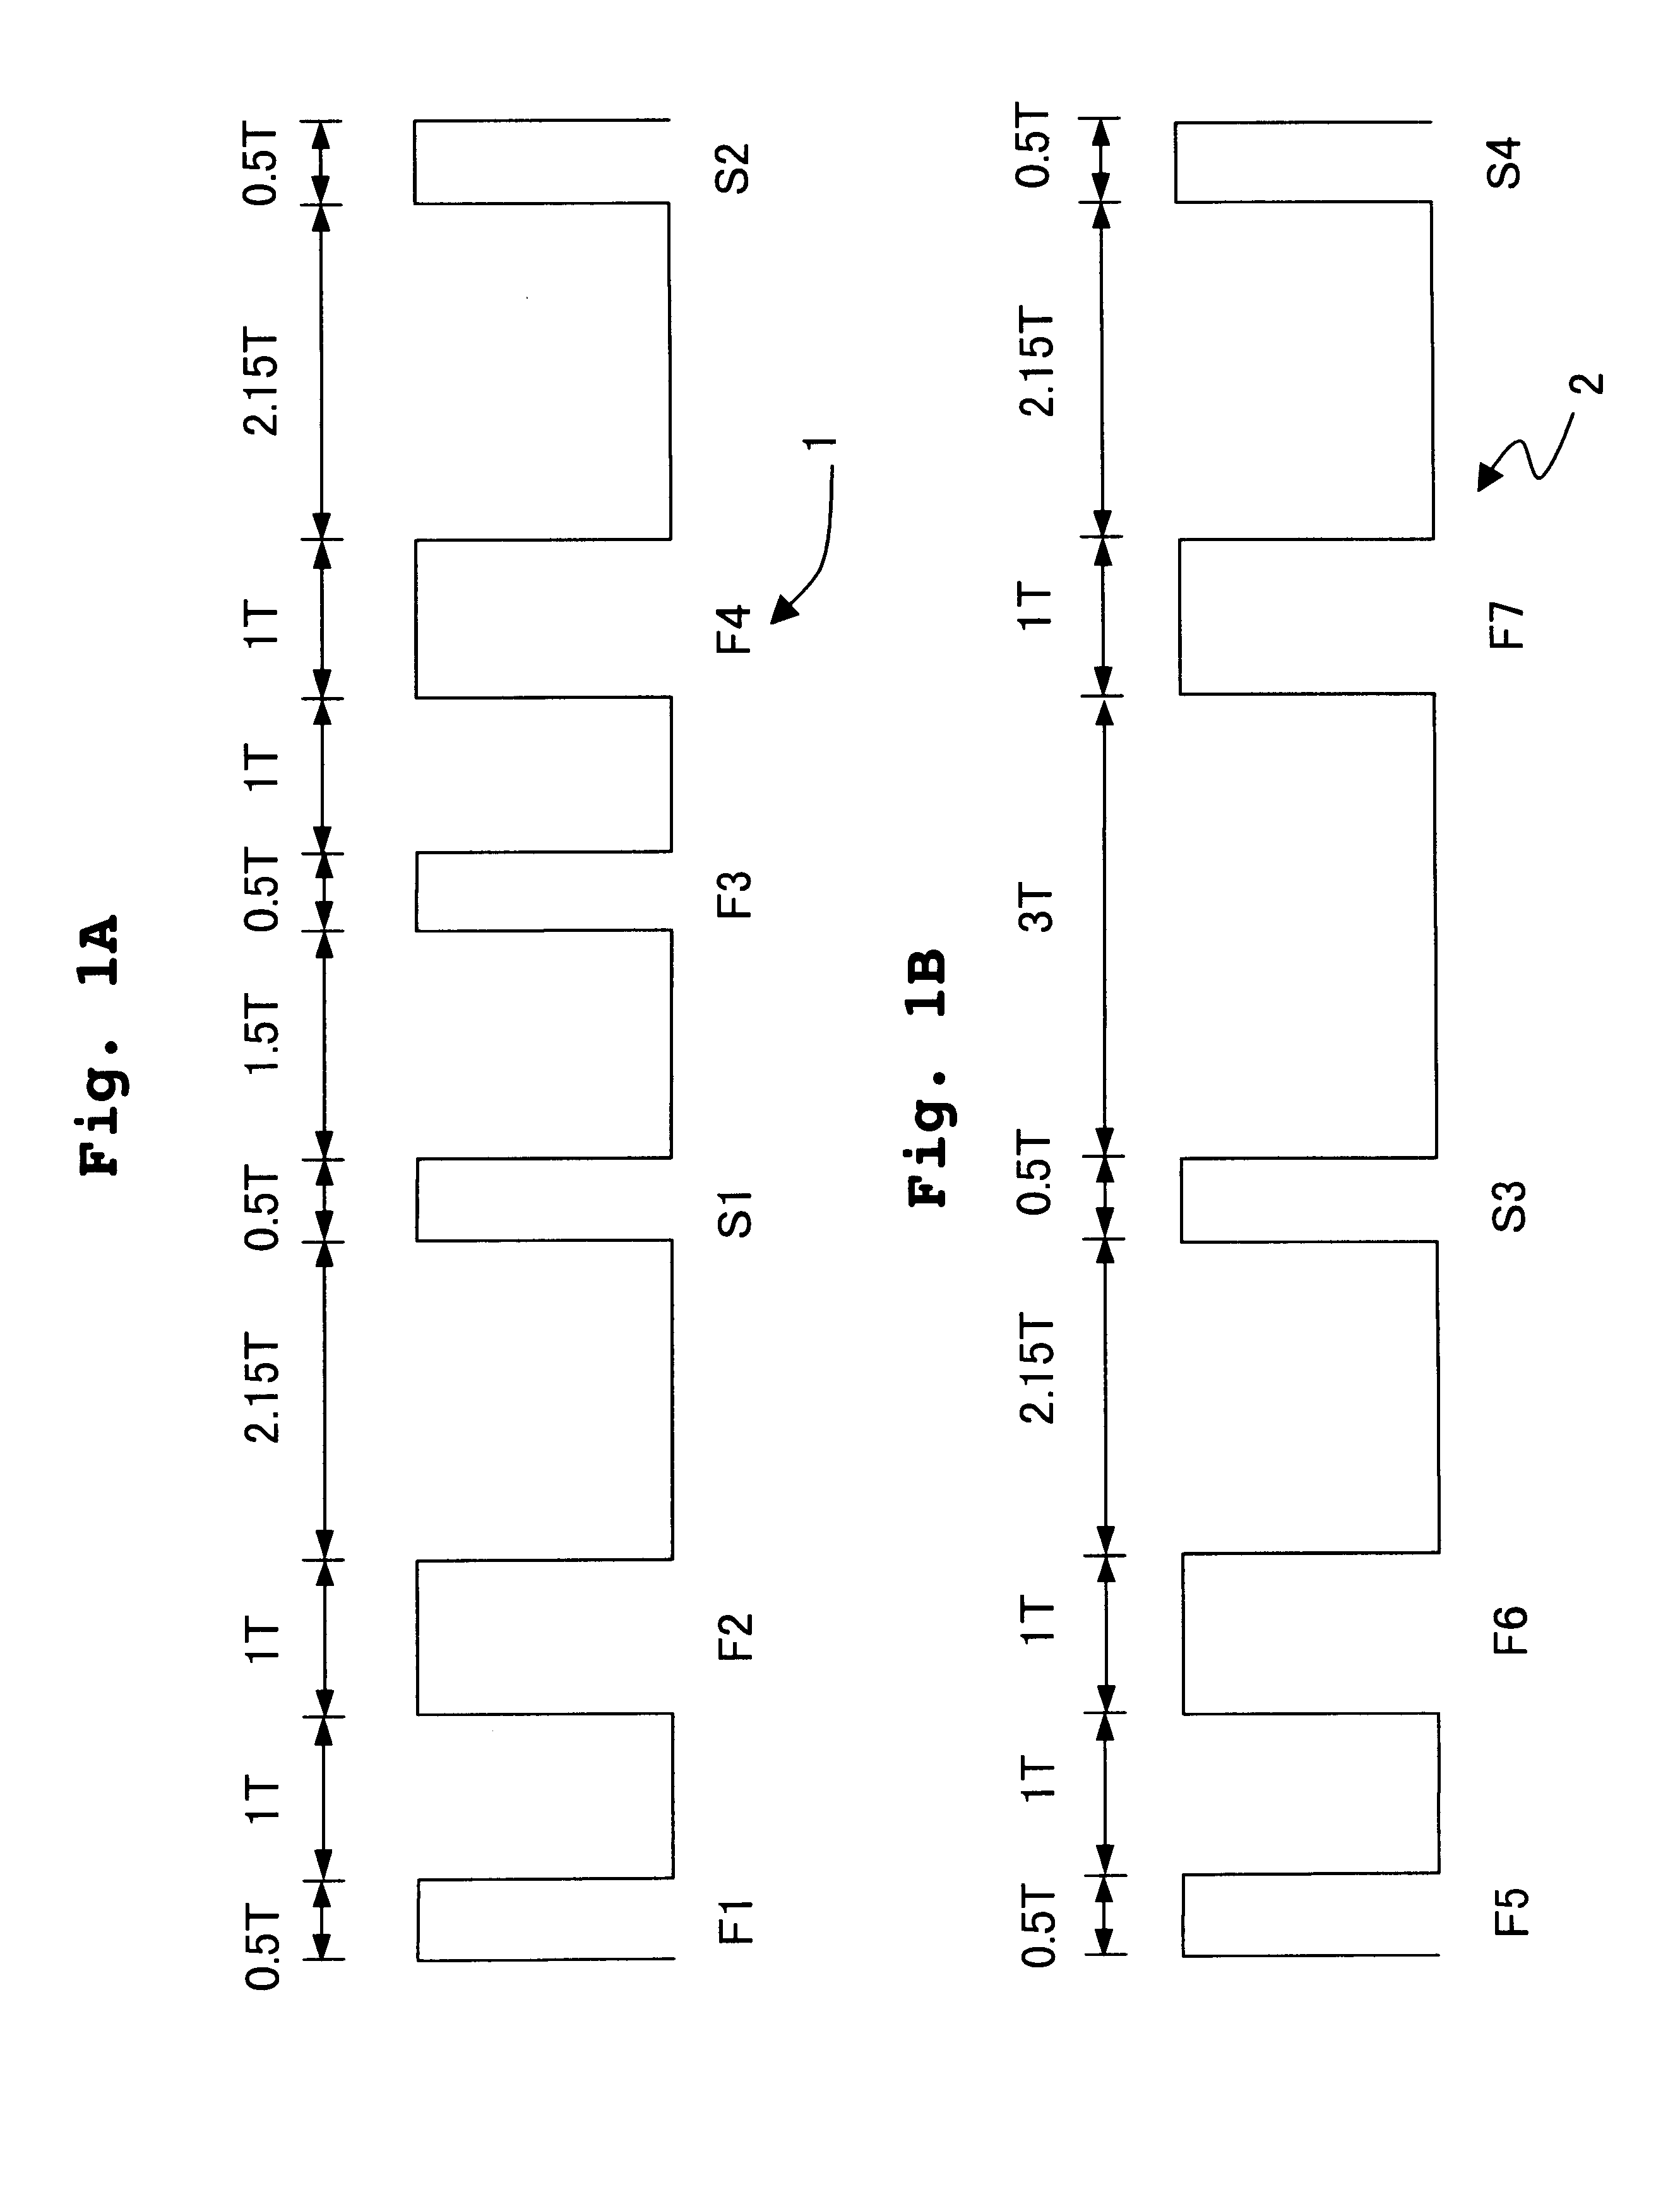 Ink jet recording method and ink jet recorder for ejecting controlled ink droplets